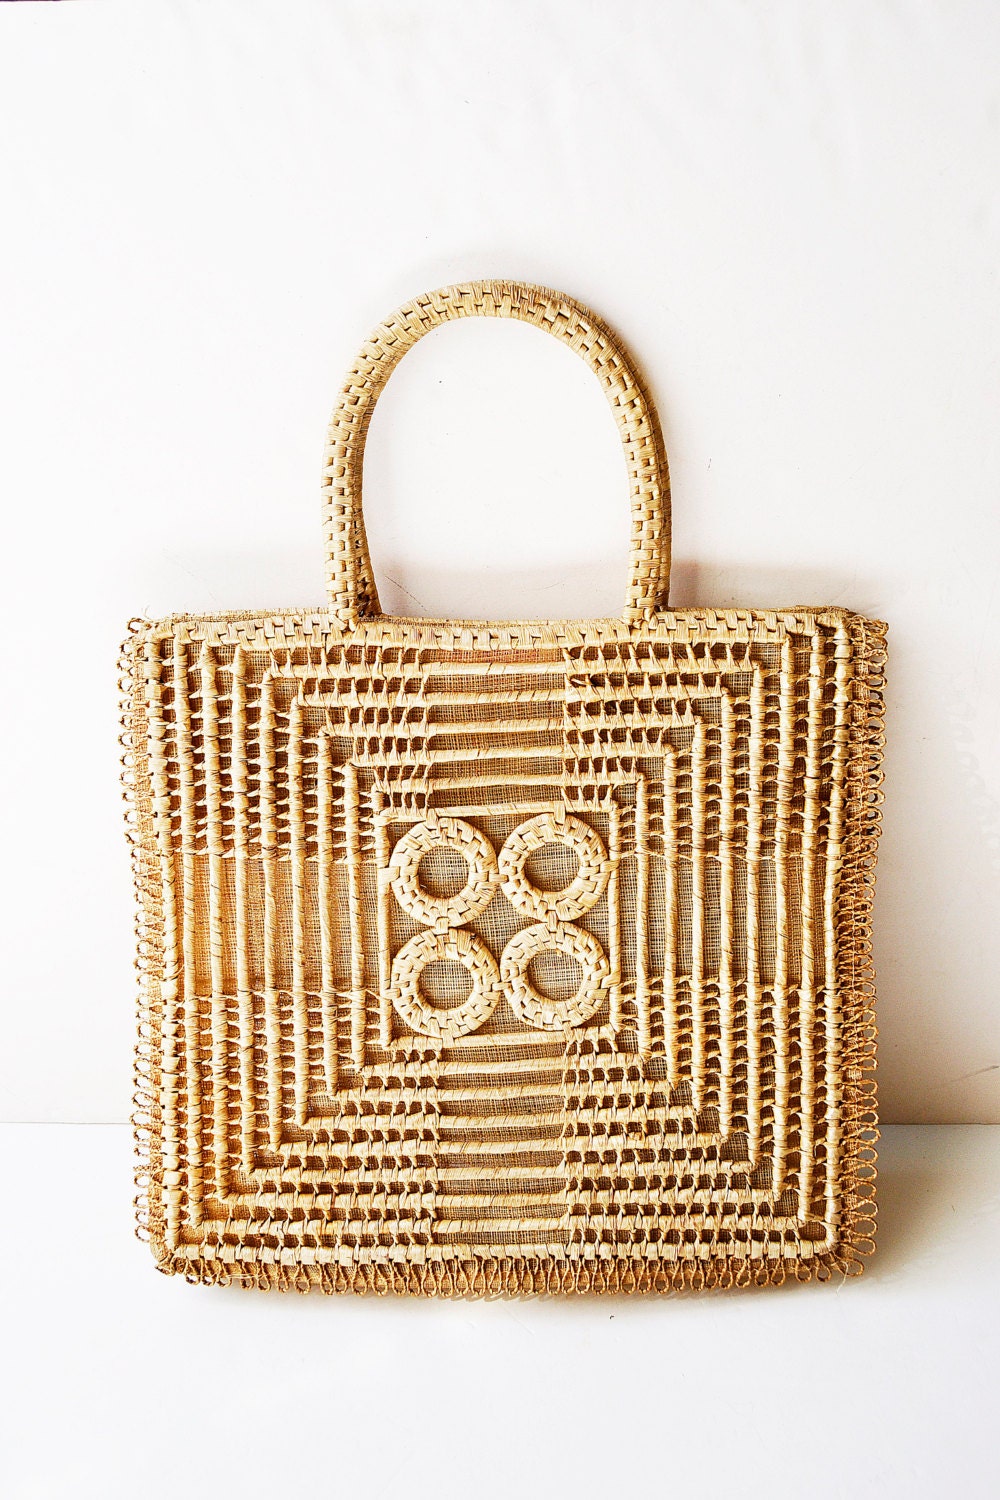 Chinese ancient bag of woven straw